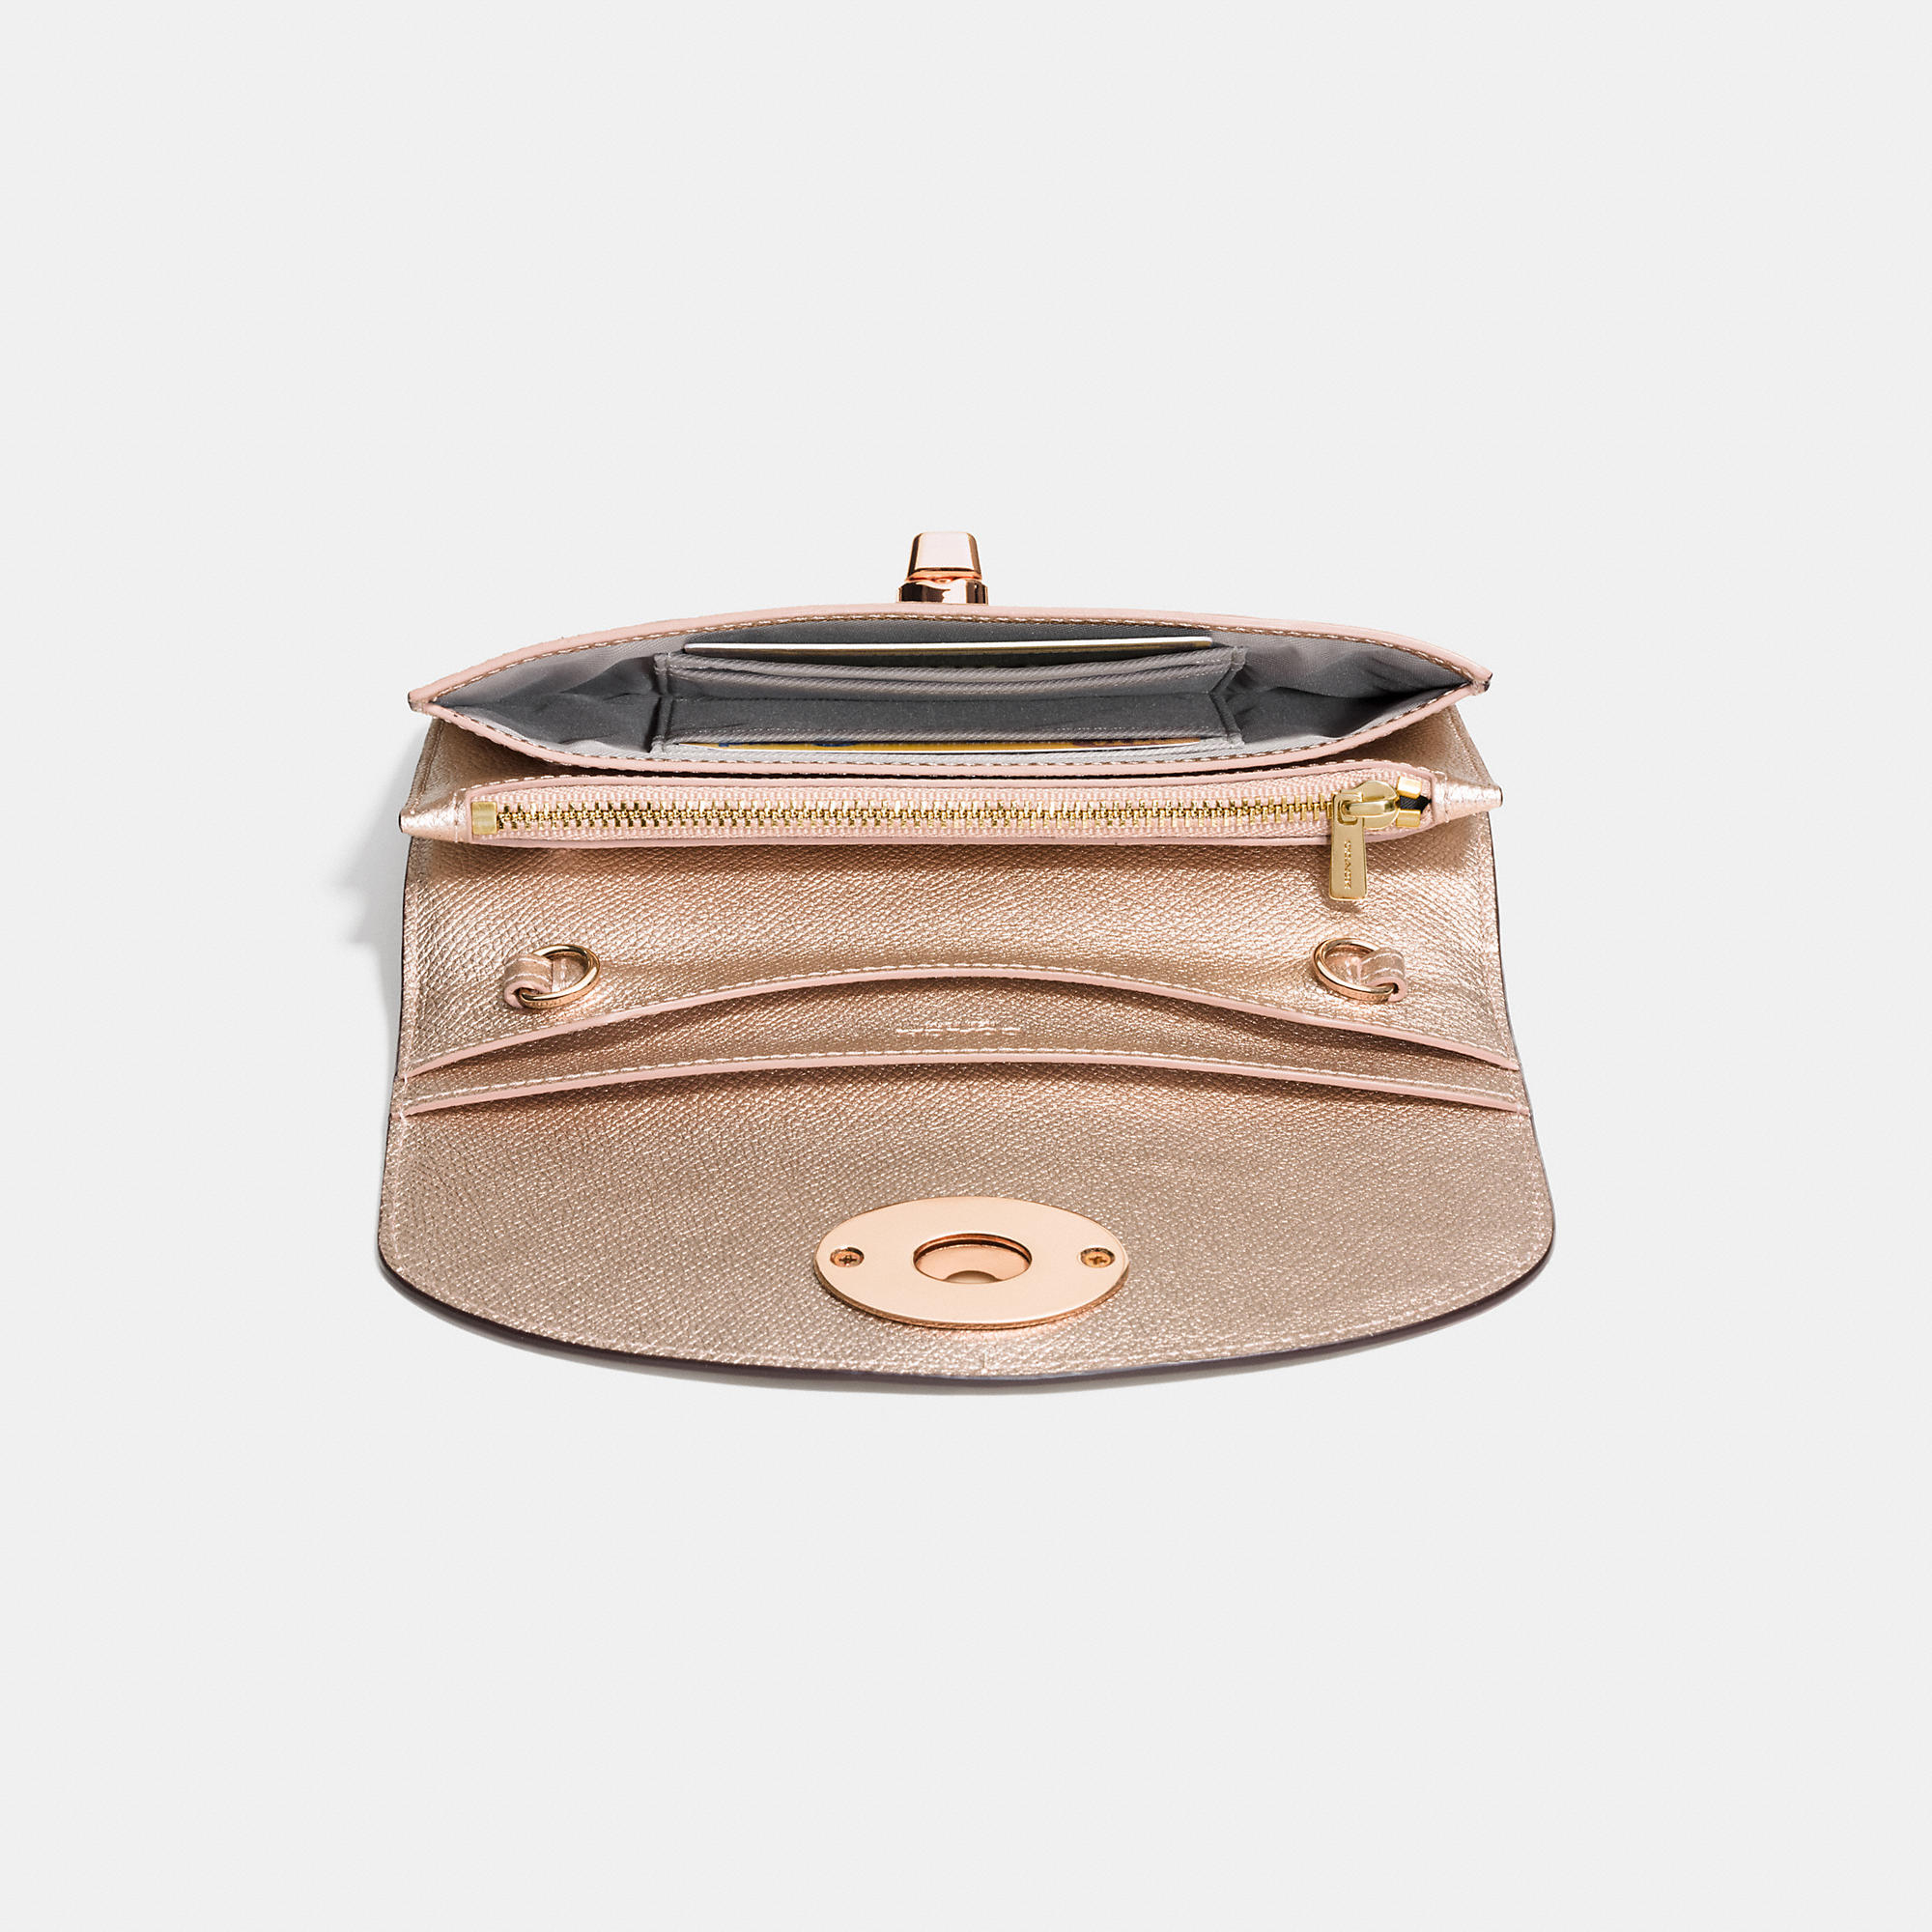 COACH Leather/Coated Canvas Clutch Gold Buckle Clutch Pink – Brand